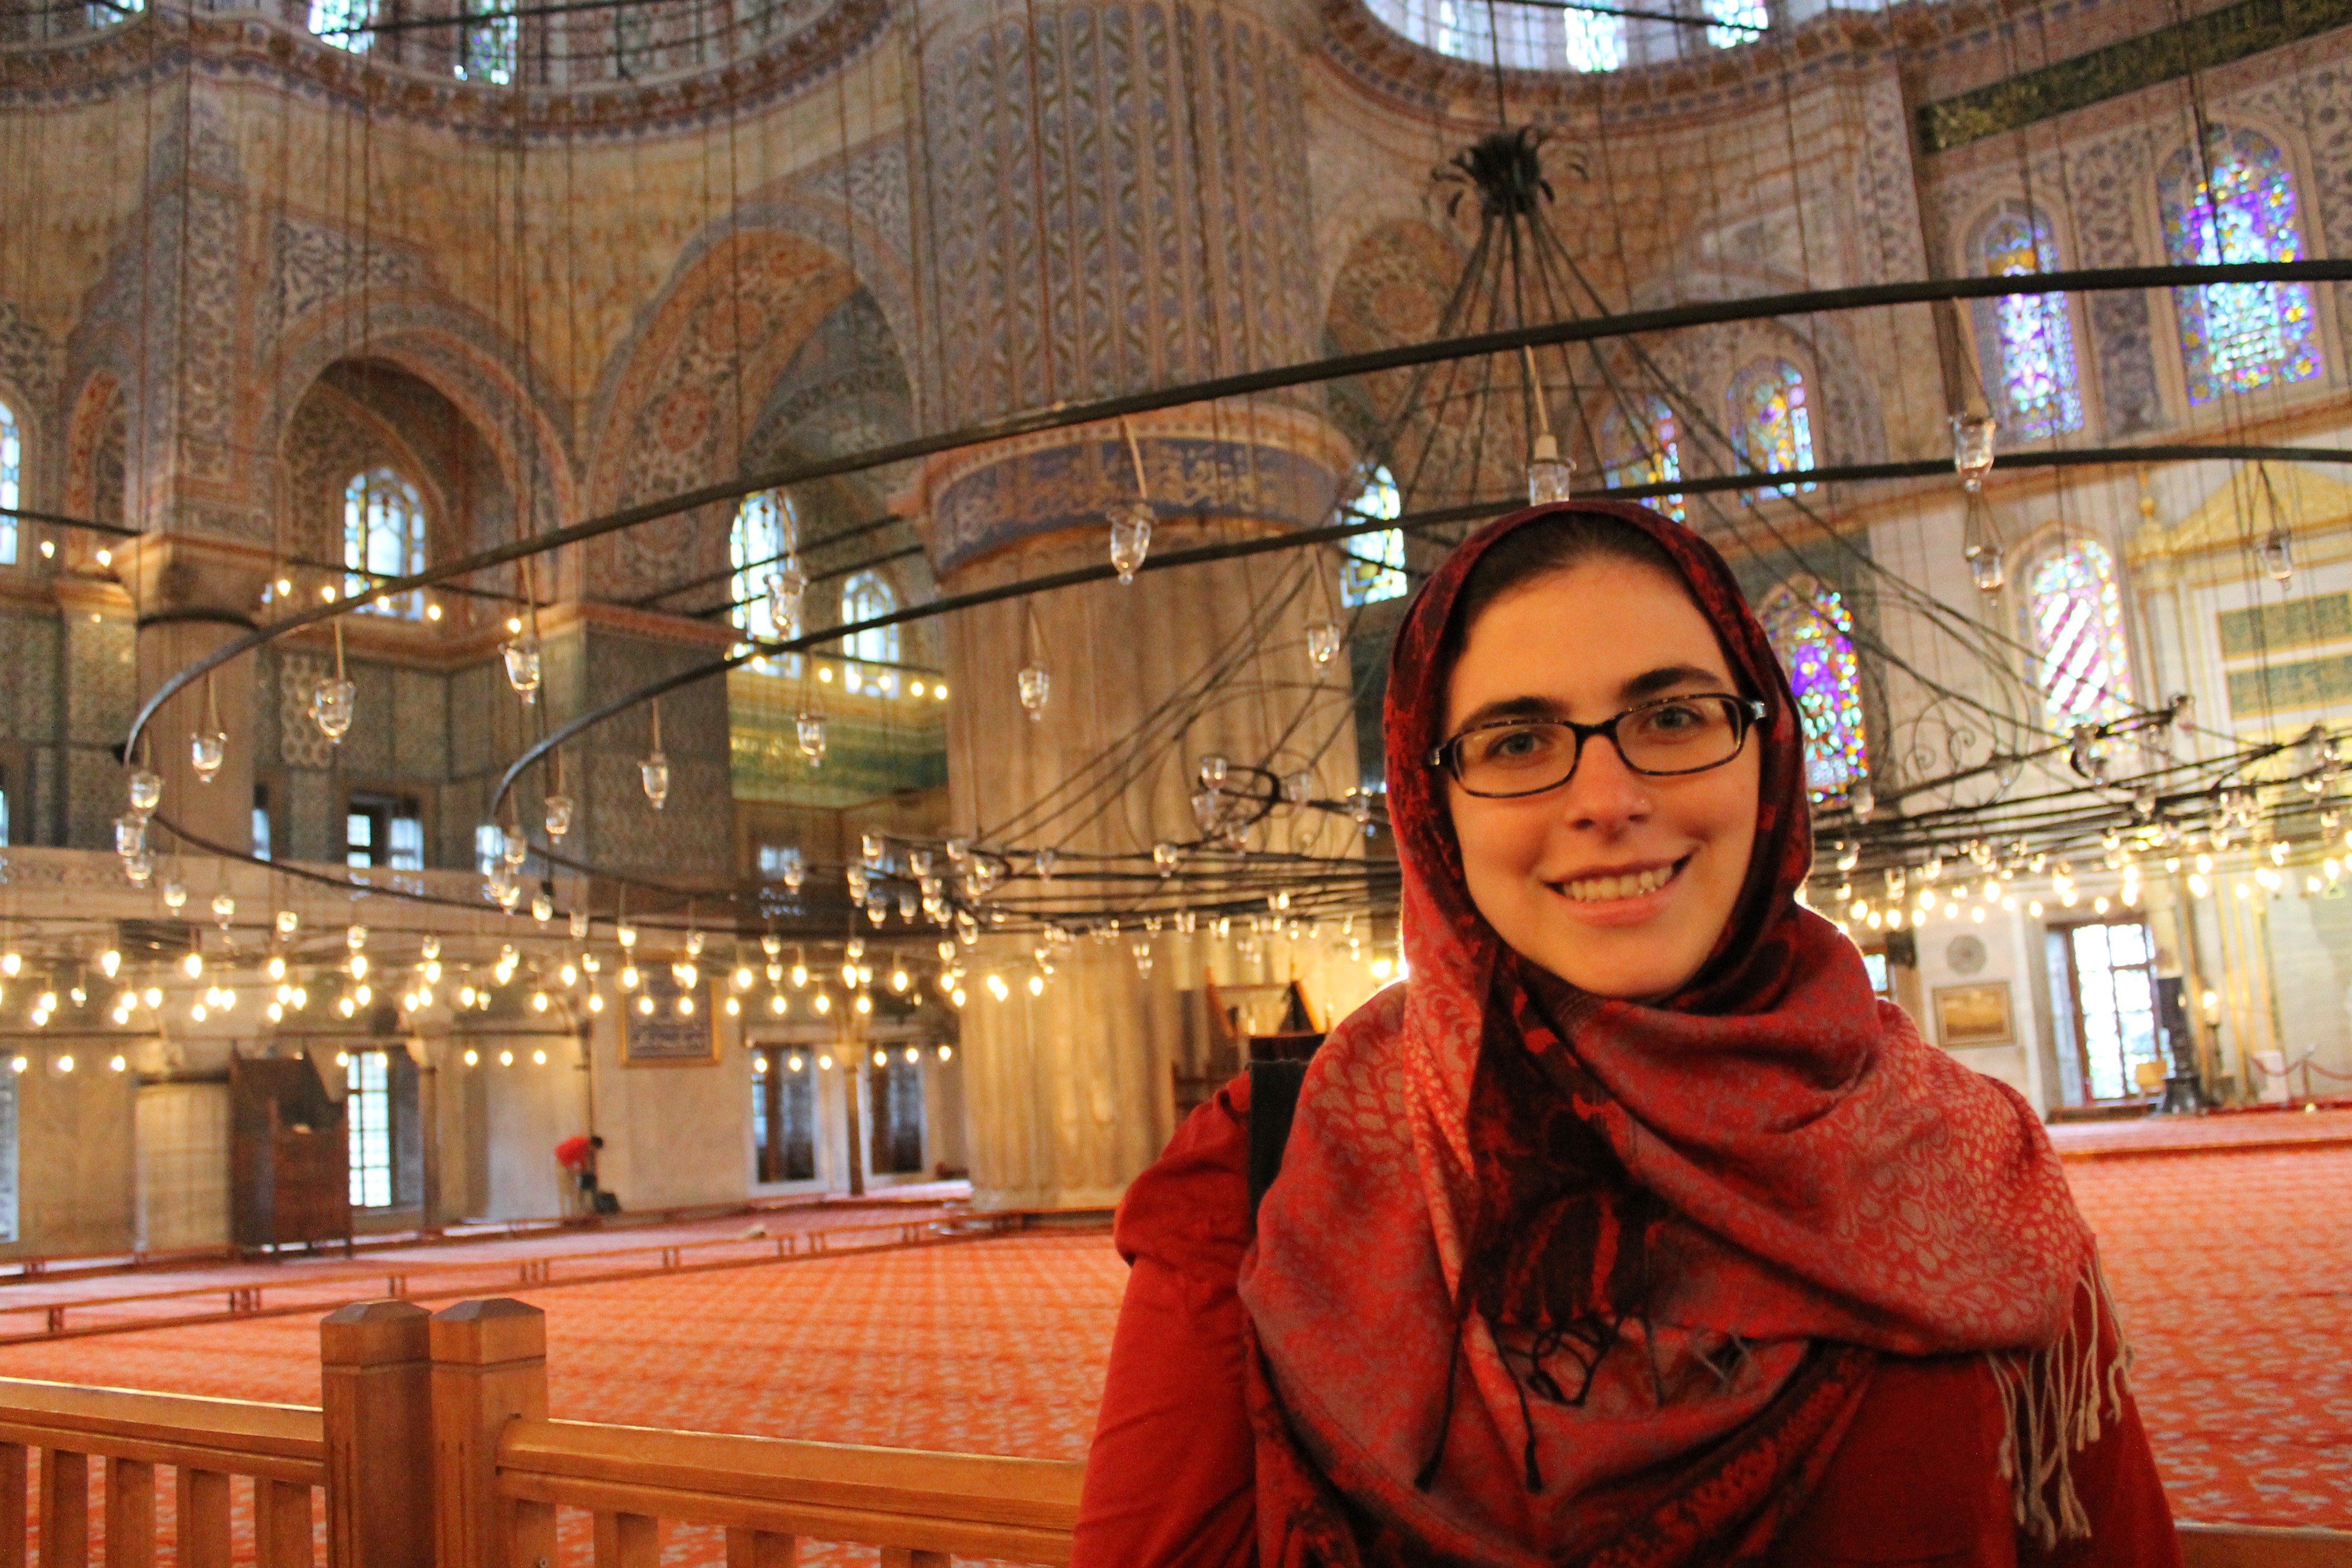 Delia in the Blue Mosque in Istanbul, Turkey.